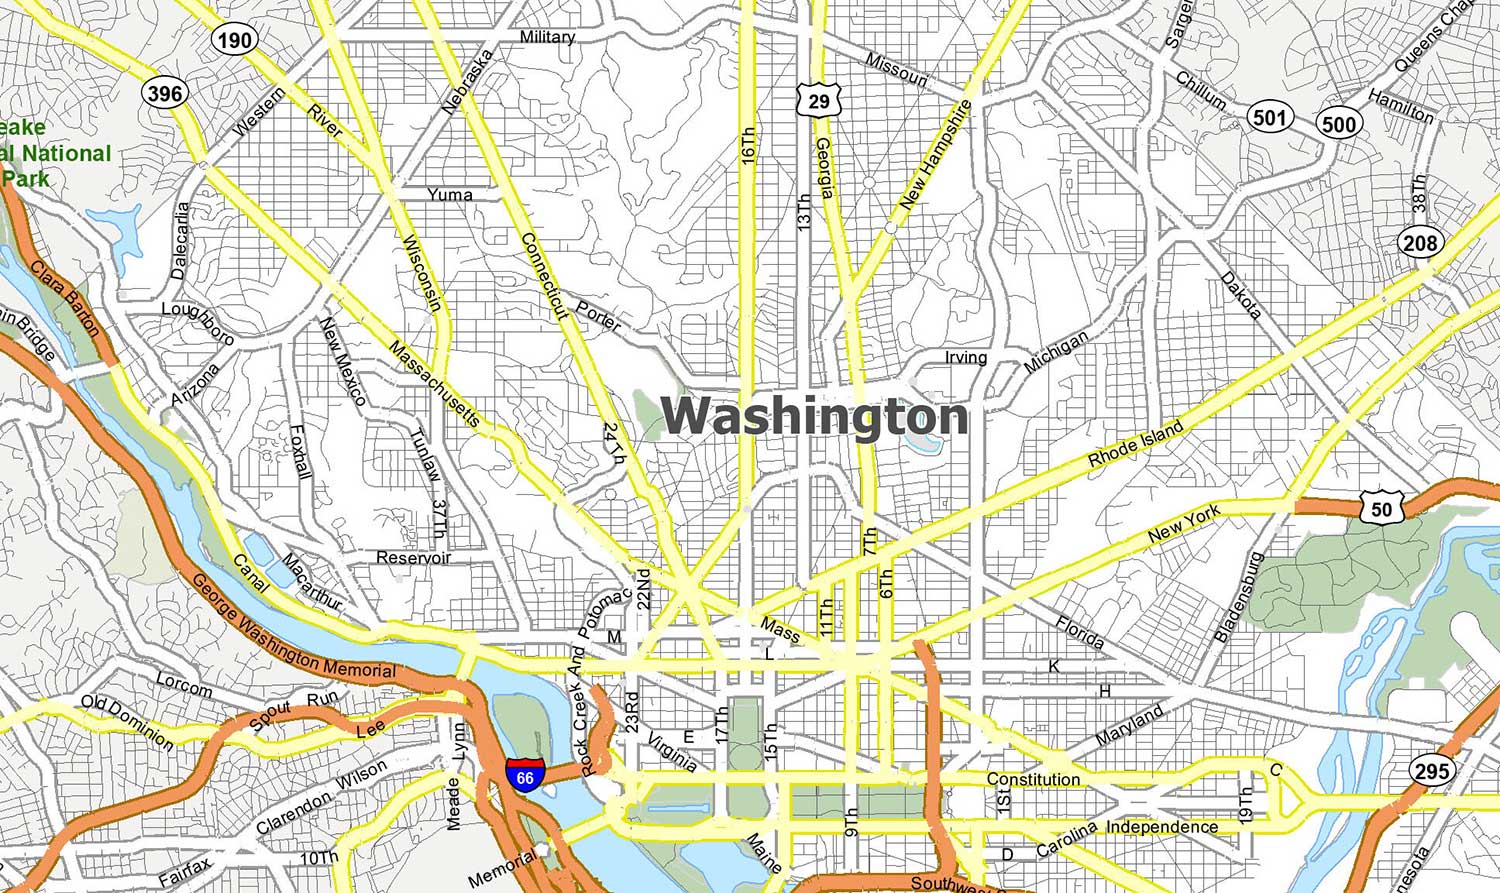 Washington Dc On Map - London Top Attractions Map